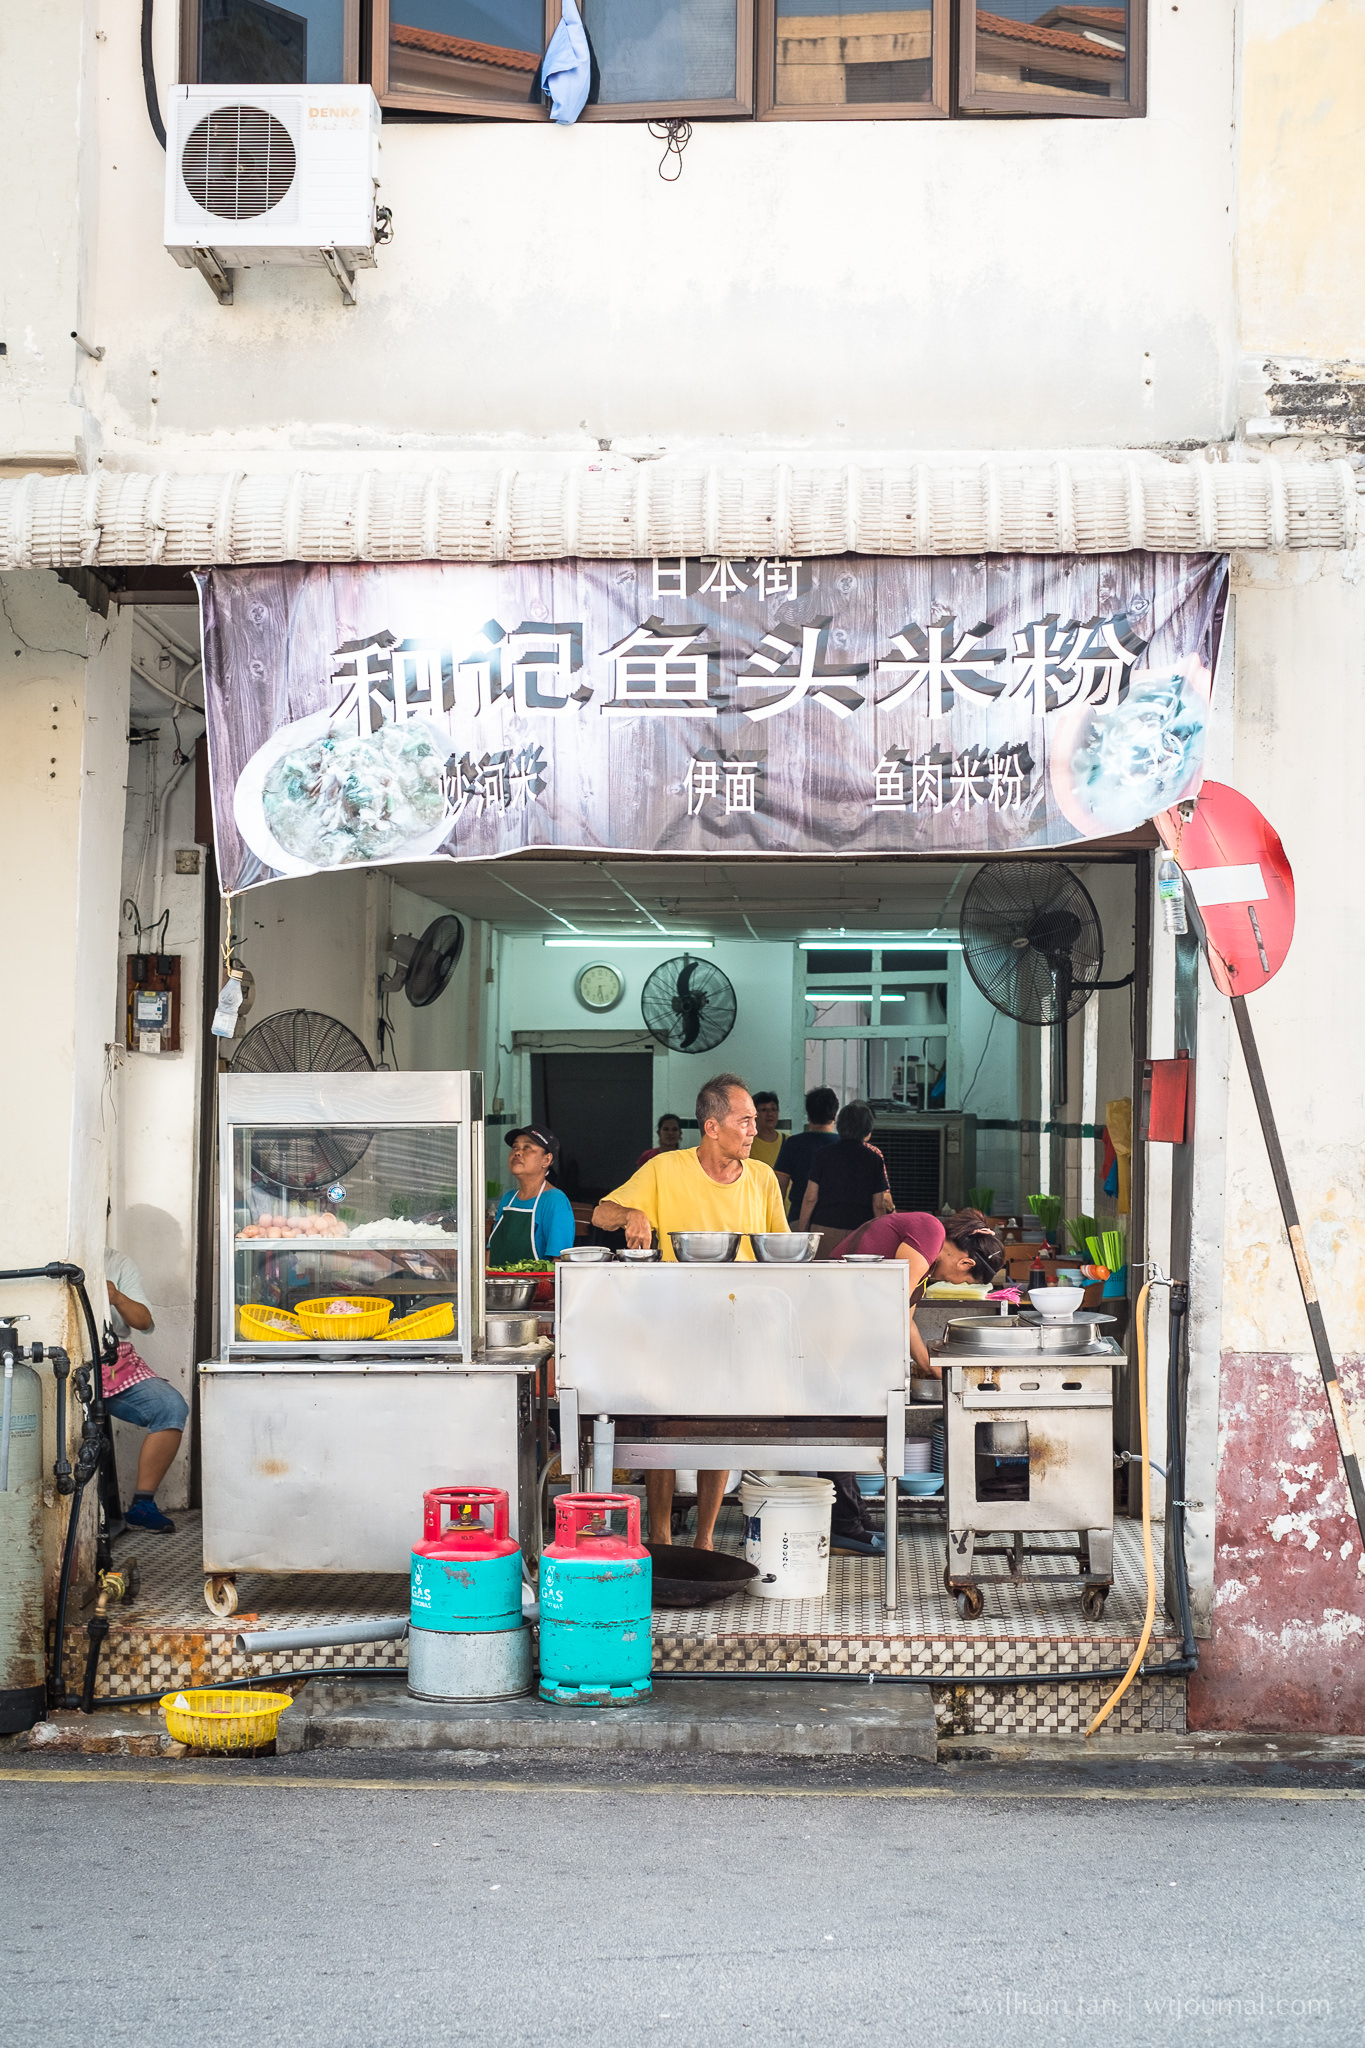 Shop serving congee on Lebuh Cintra